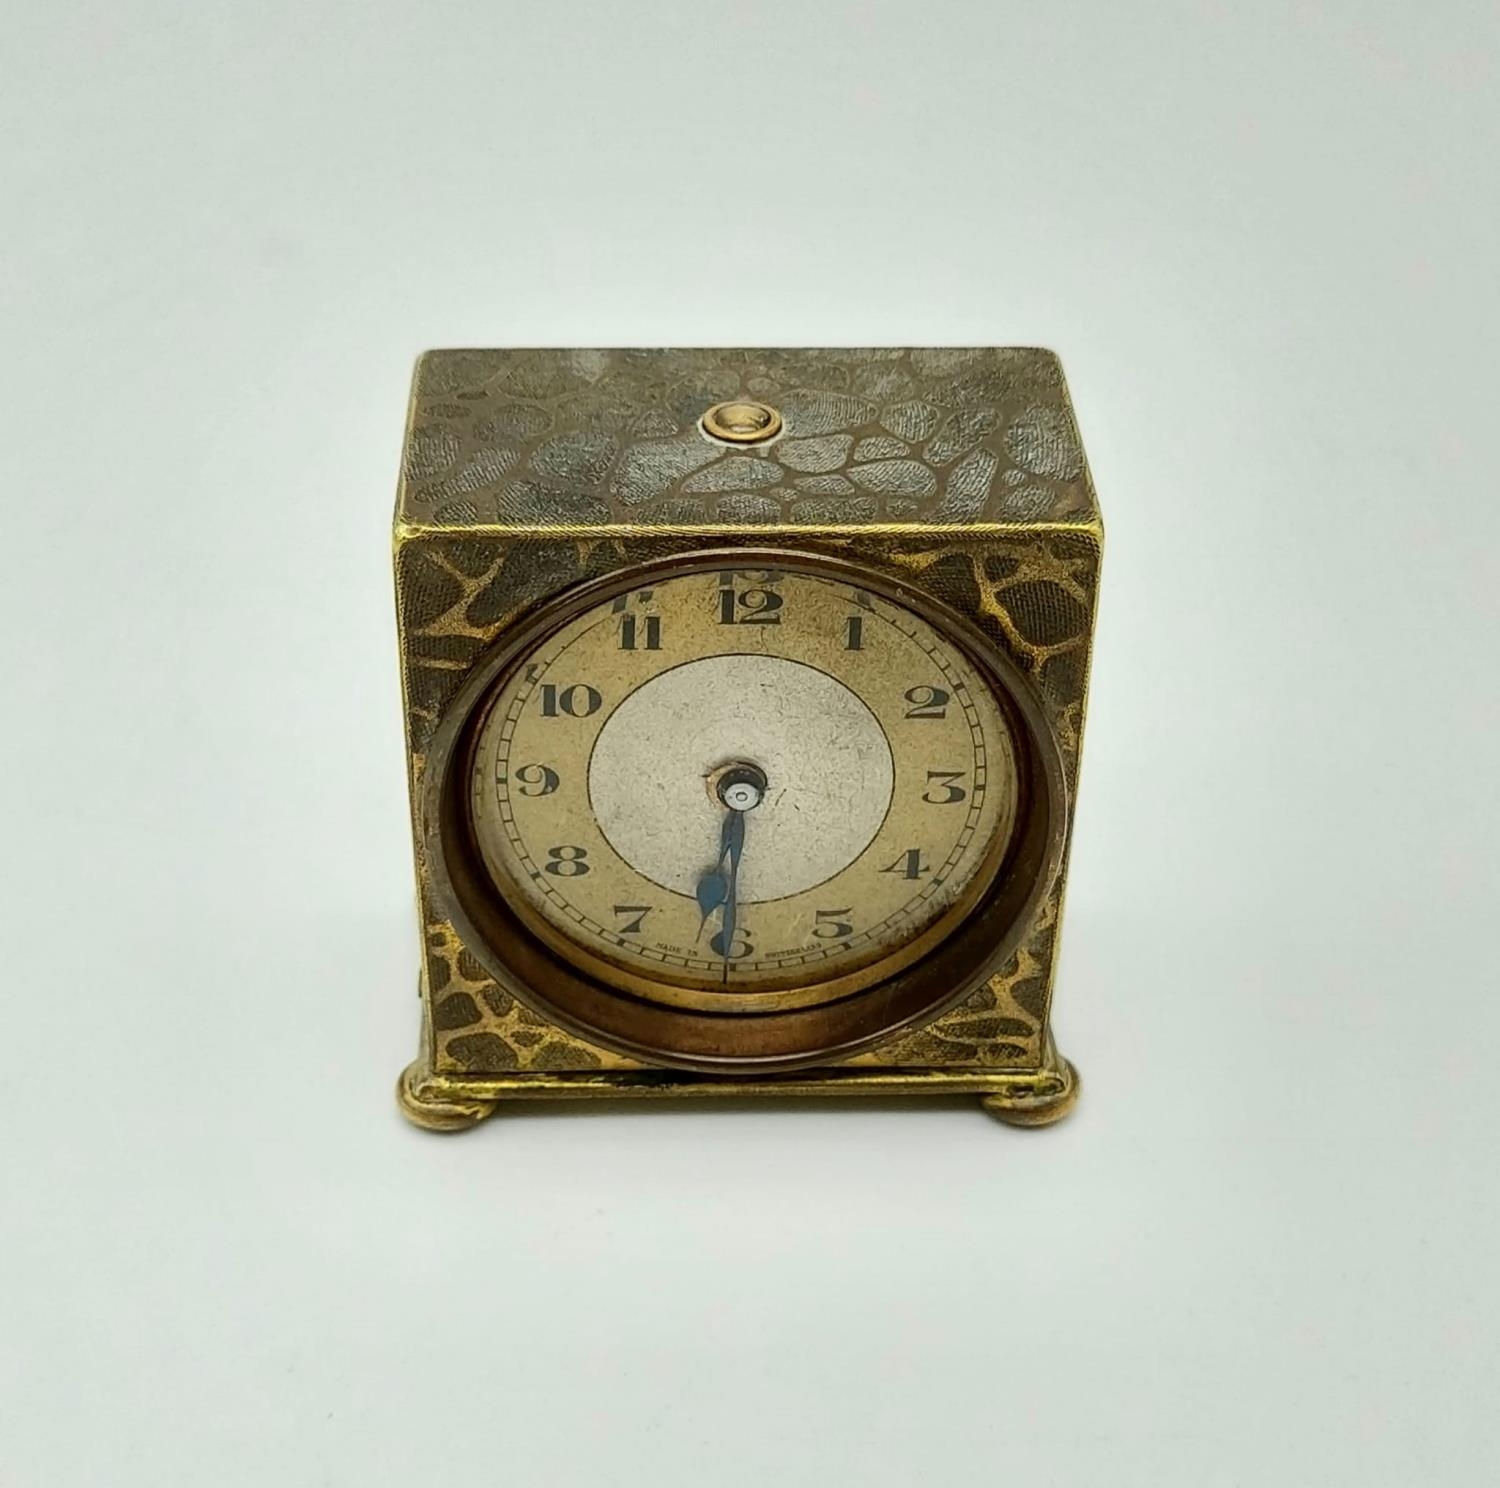 An Early French Travel Alarm Clock - Patented. In a rockery pattern. 5 x 5cm. In working order. - Image 6 of 8